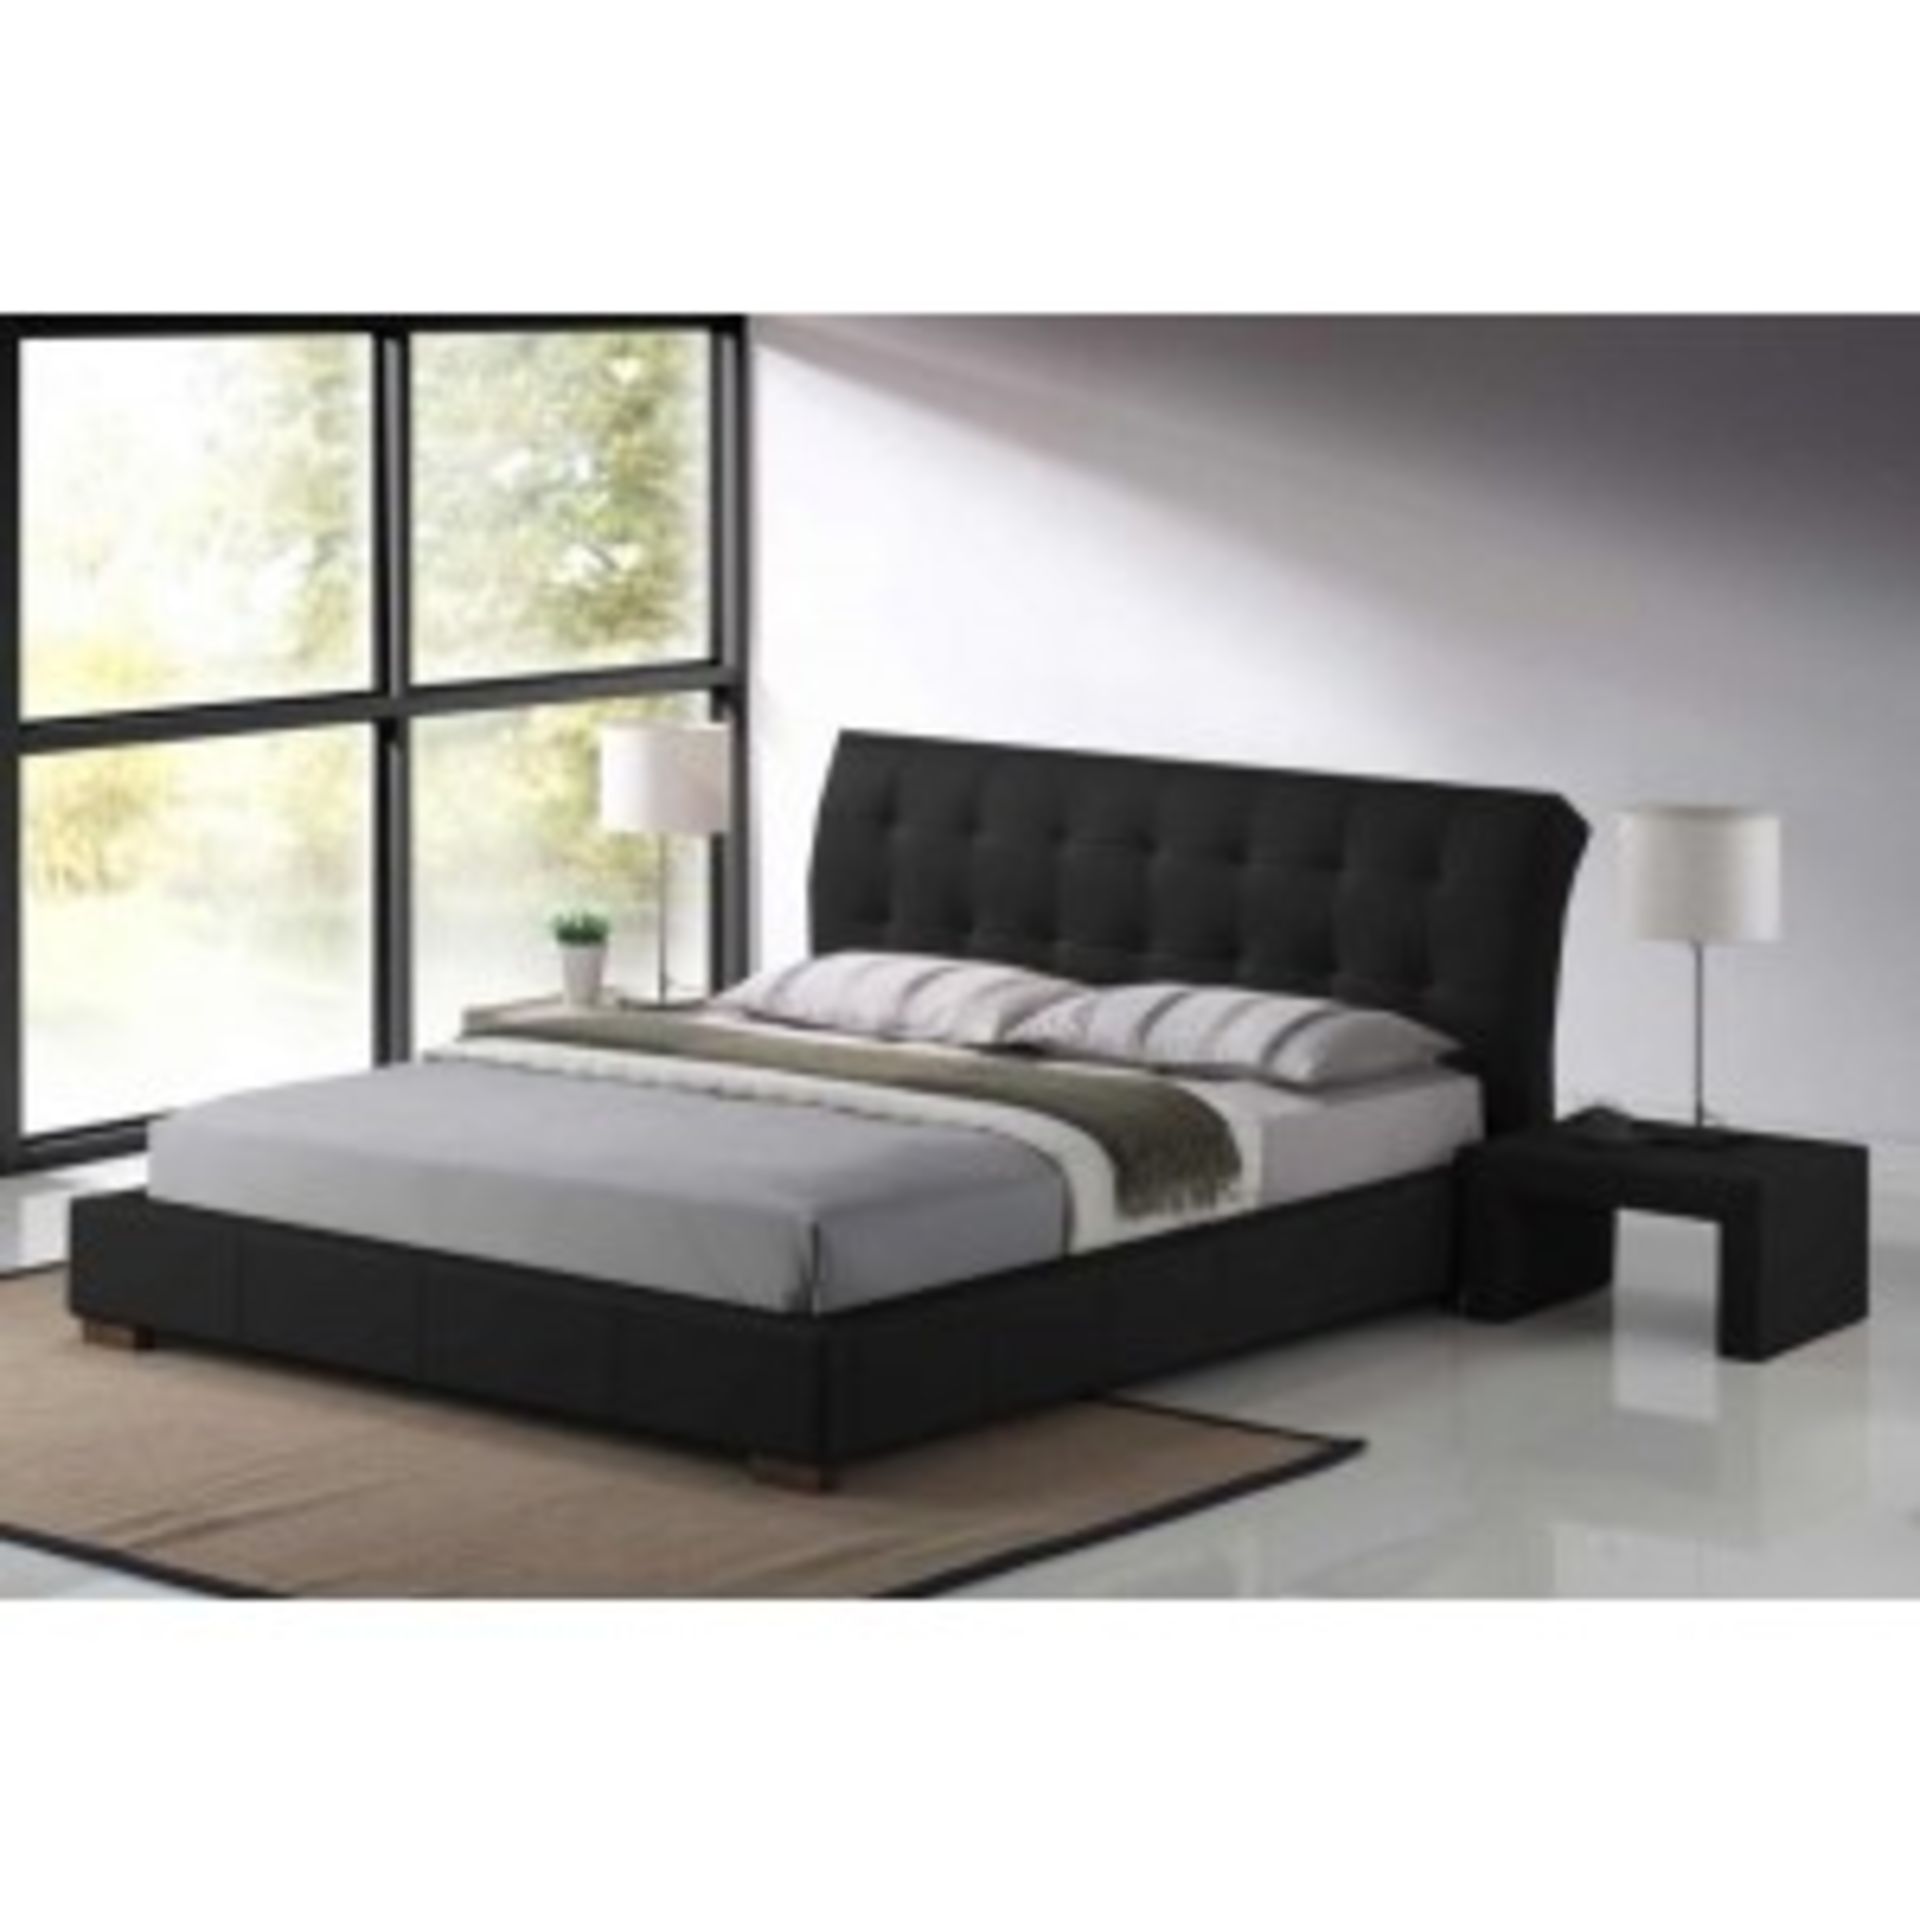 Brand new boxed direct from the manufacturers double Sonoma up bedstead in black